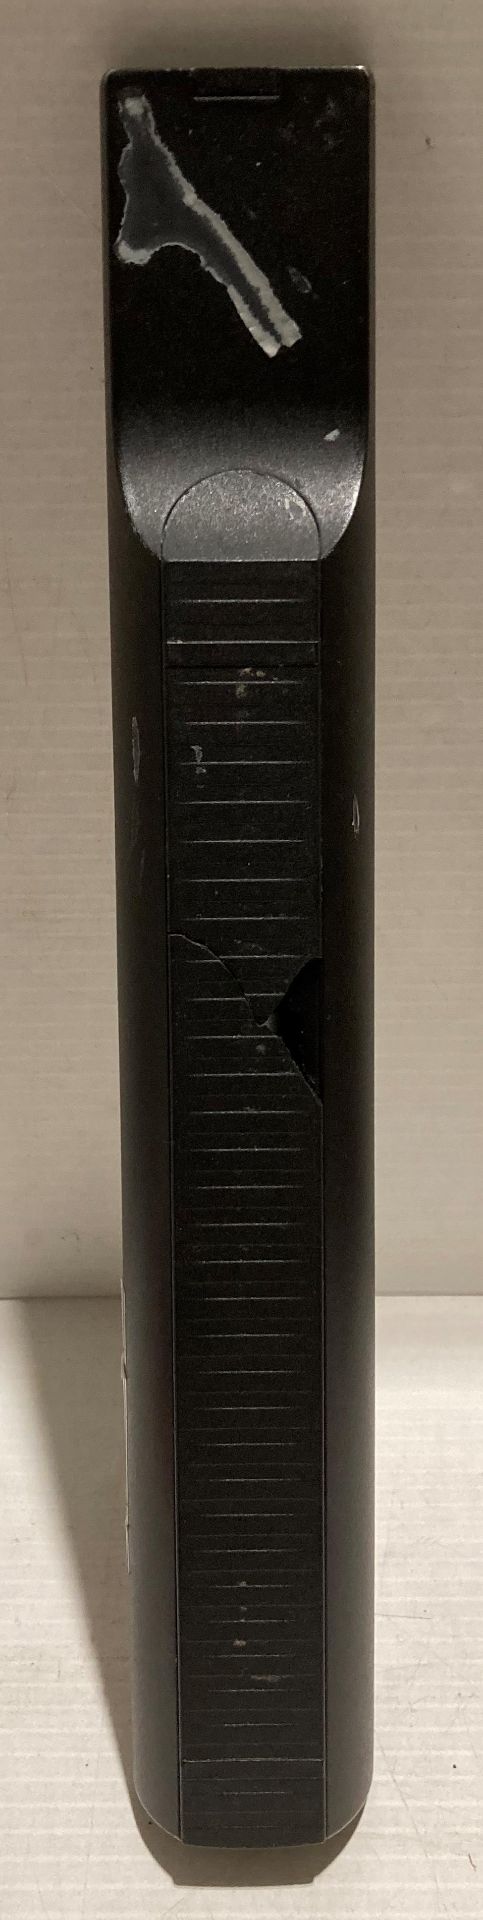 Bang & Olufsen remote control (cracked) together with leads and manuals (Saleroom location: S2) - Image 3 of 3